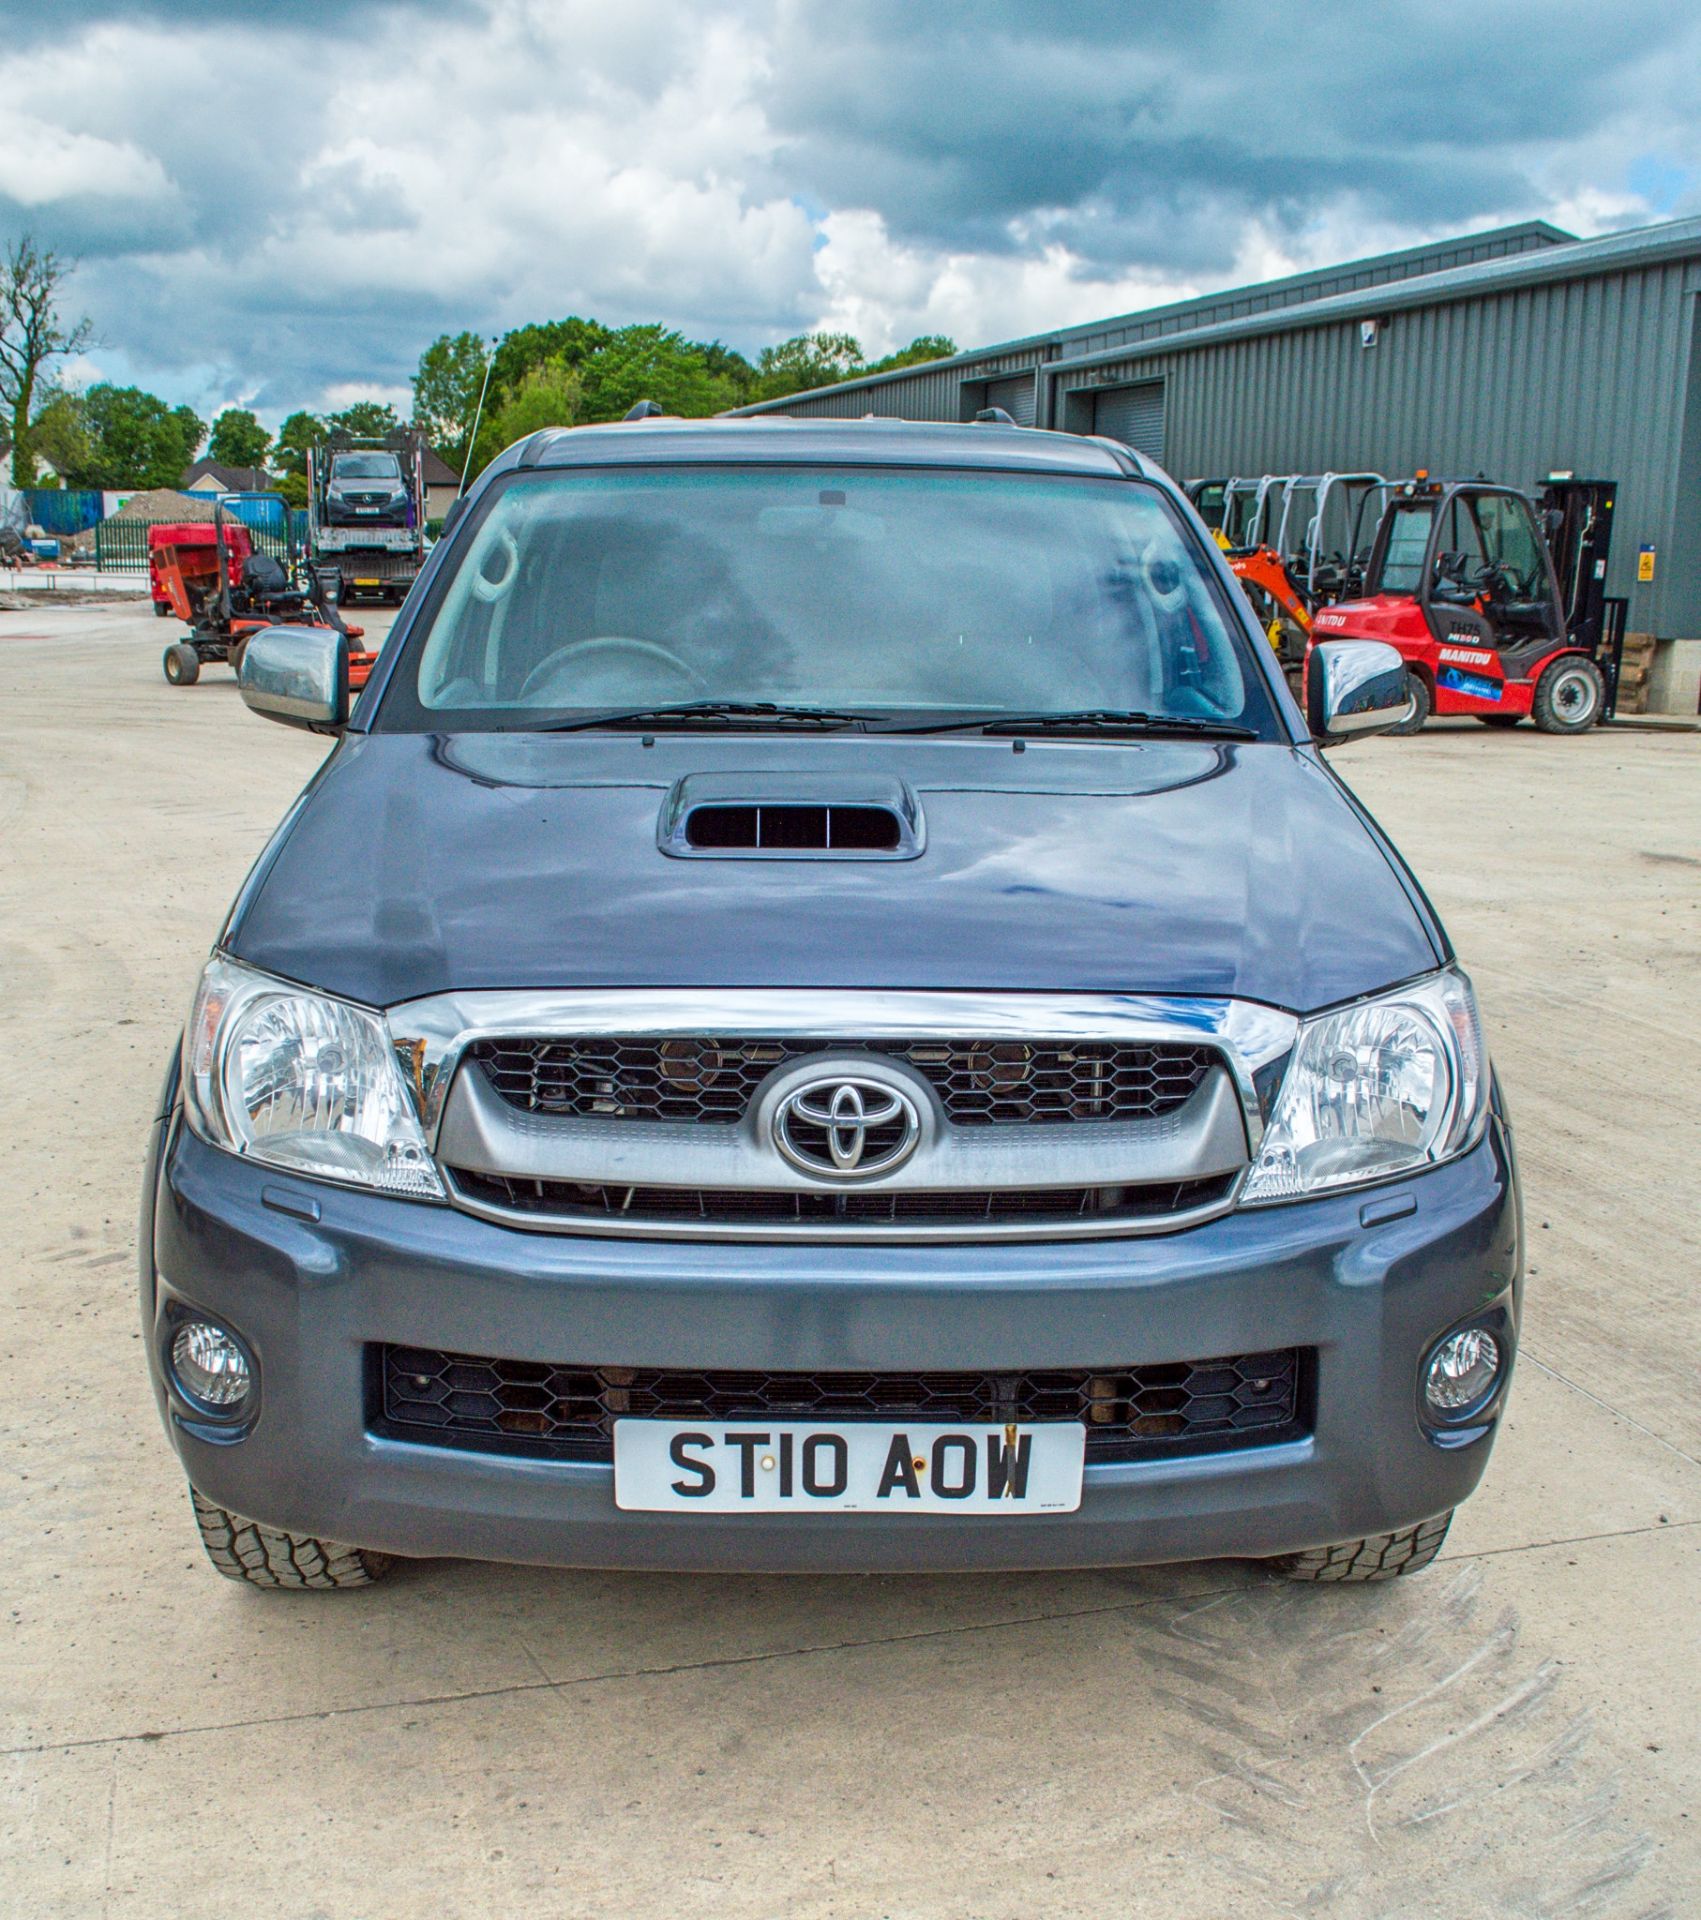 Toyota Hilux 2.5 D-4D 144 HL3 4wd manual double cab pick up Reg No: ST10 AOW Date of Registration: - Image 5 of 25